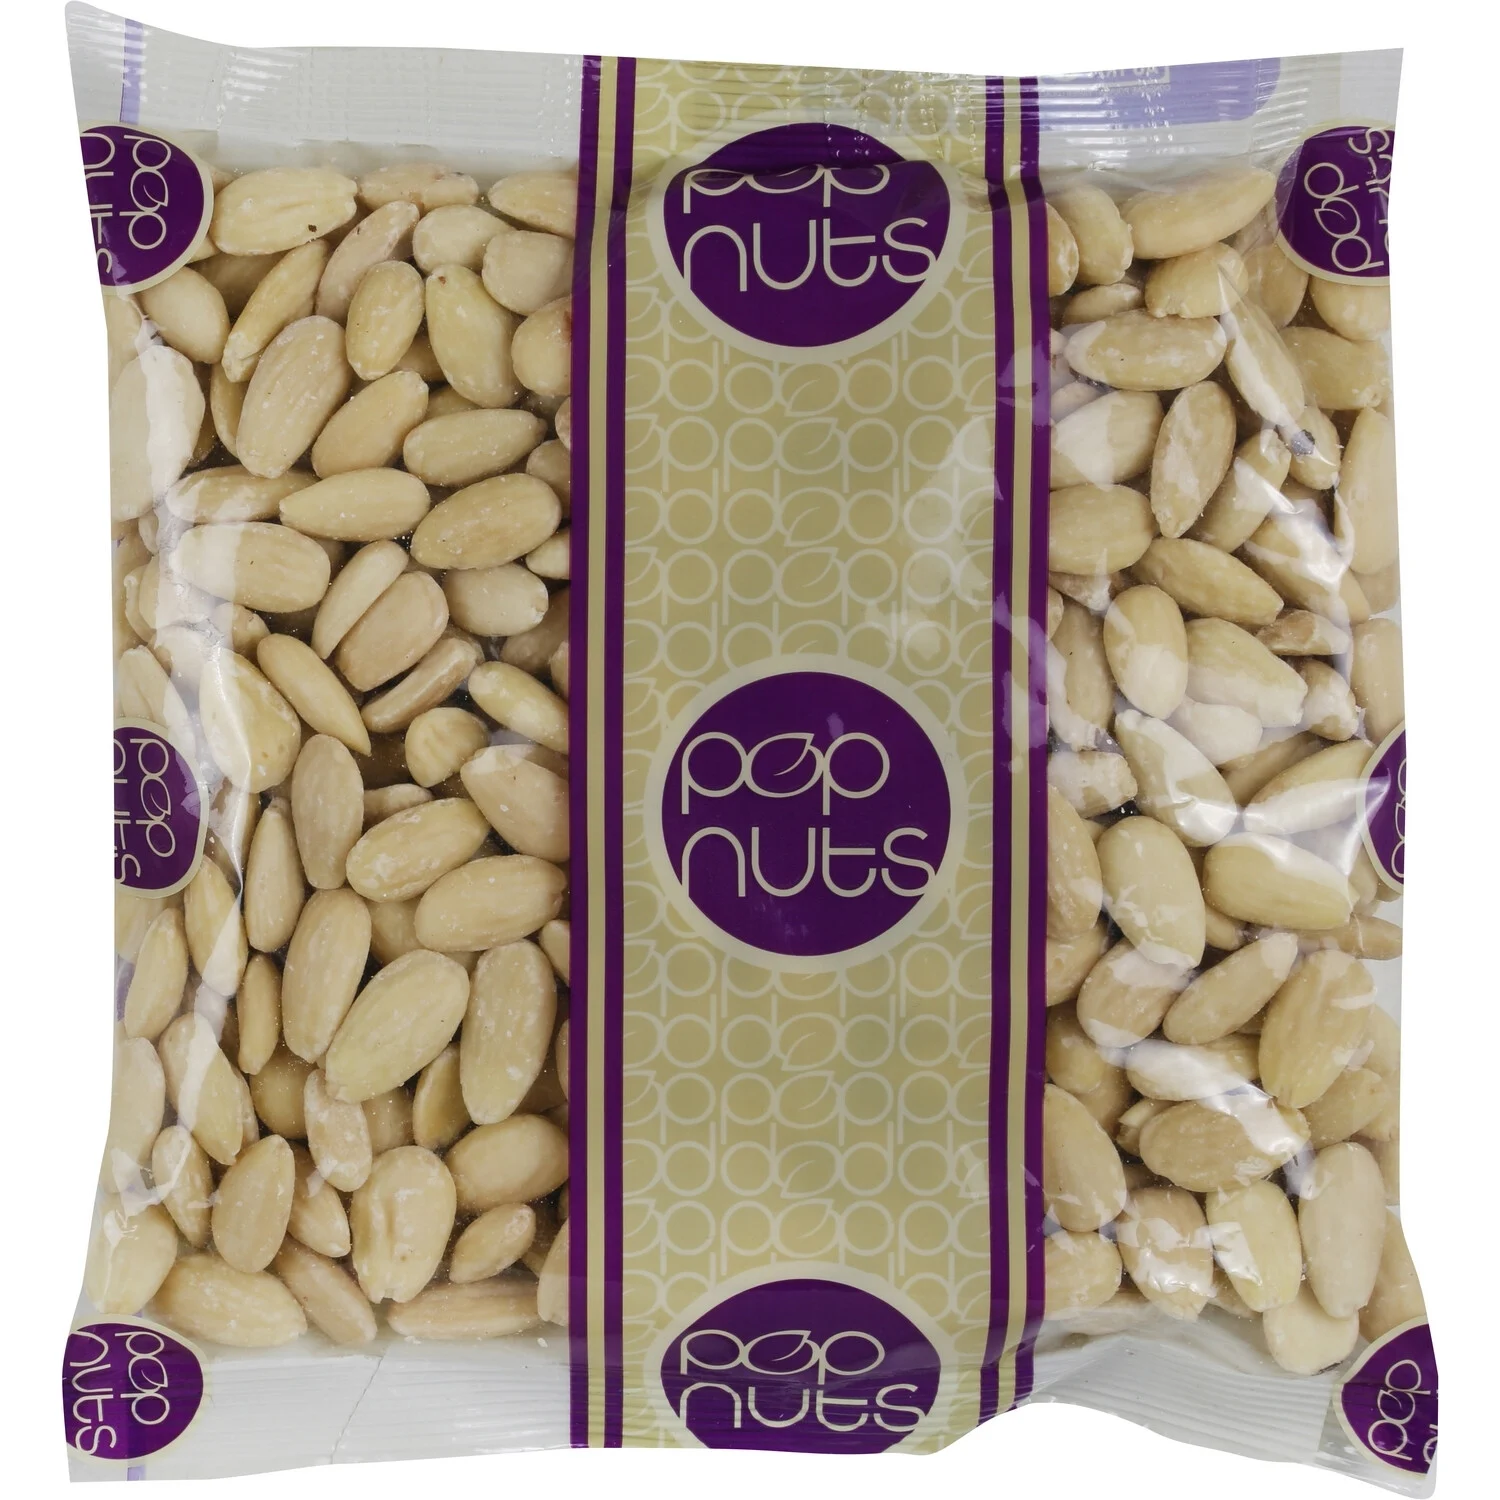 500g Blanched Almond Popnuts